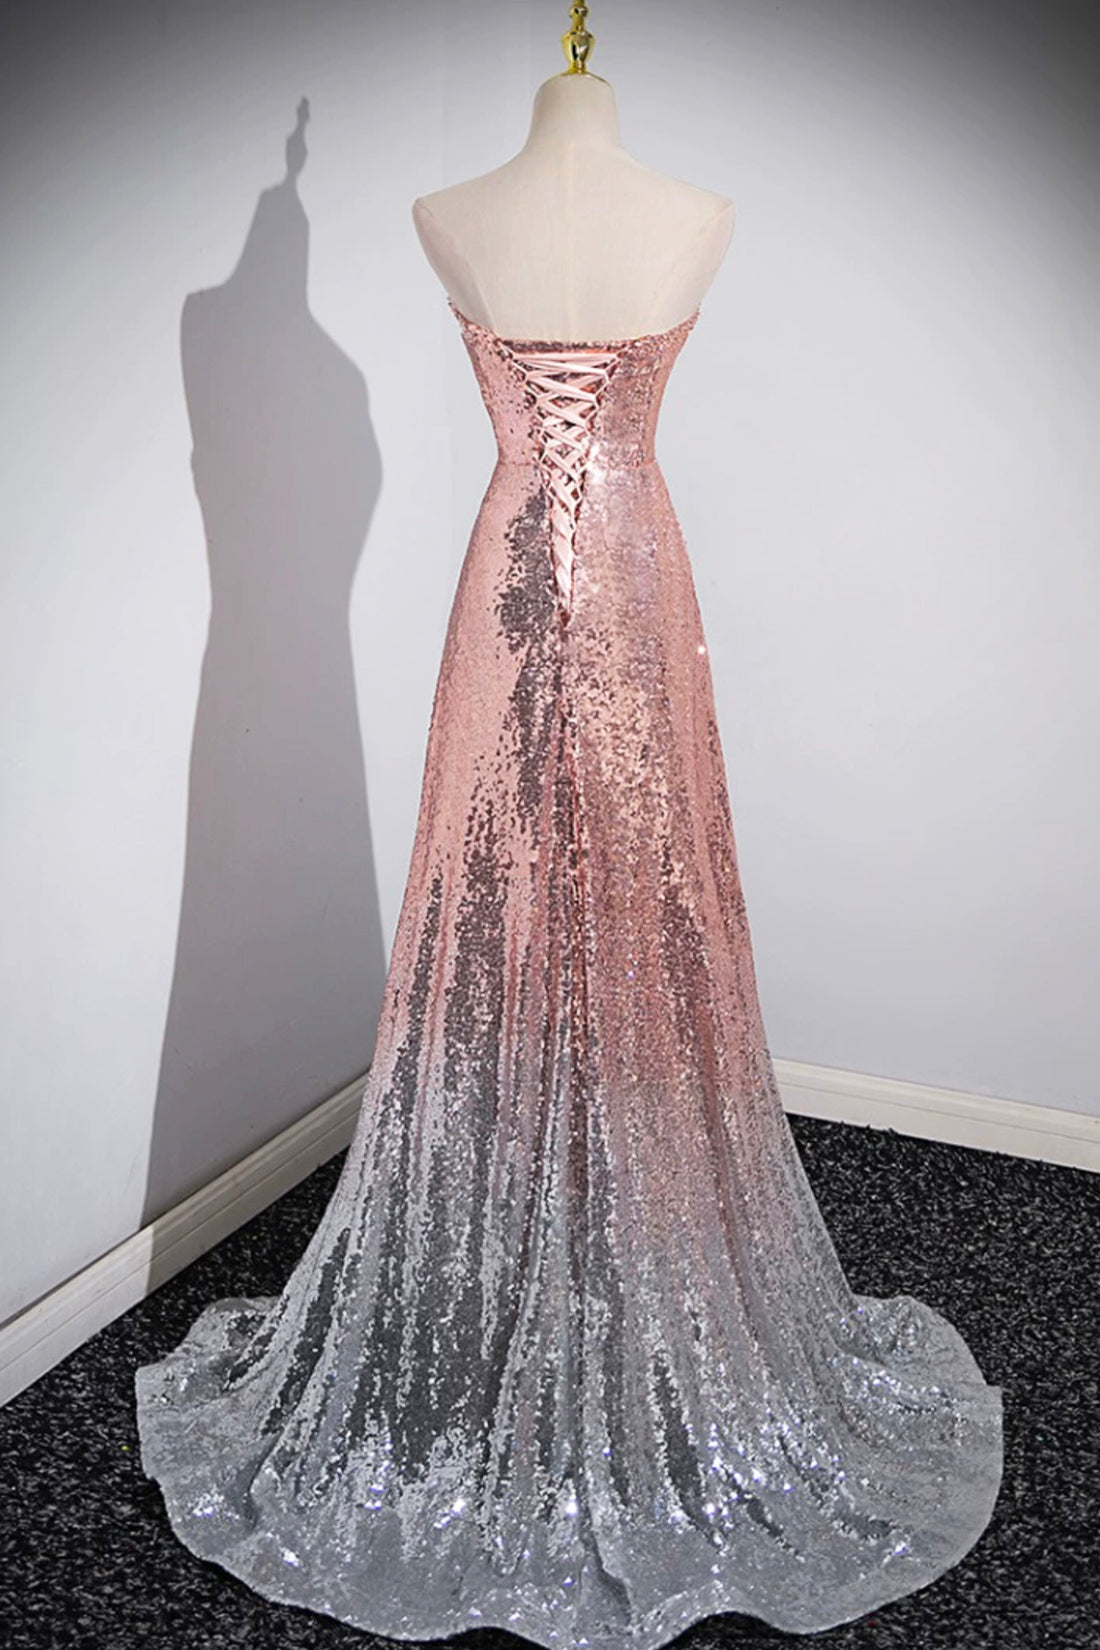 Cleo | Mermaid Sequins Long Prom Dress, Sparkling Sweetheart Neckline Ombre Evening Dress